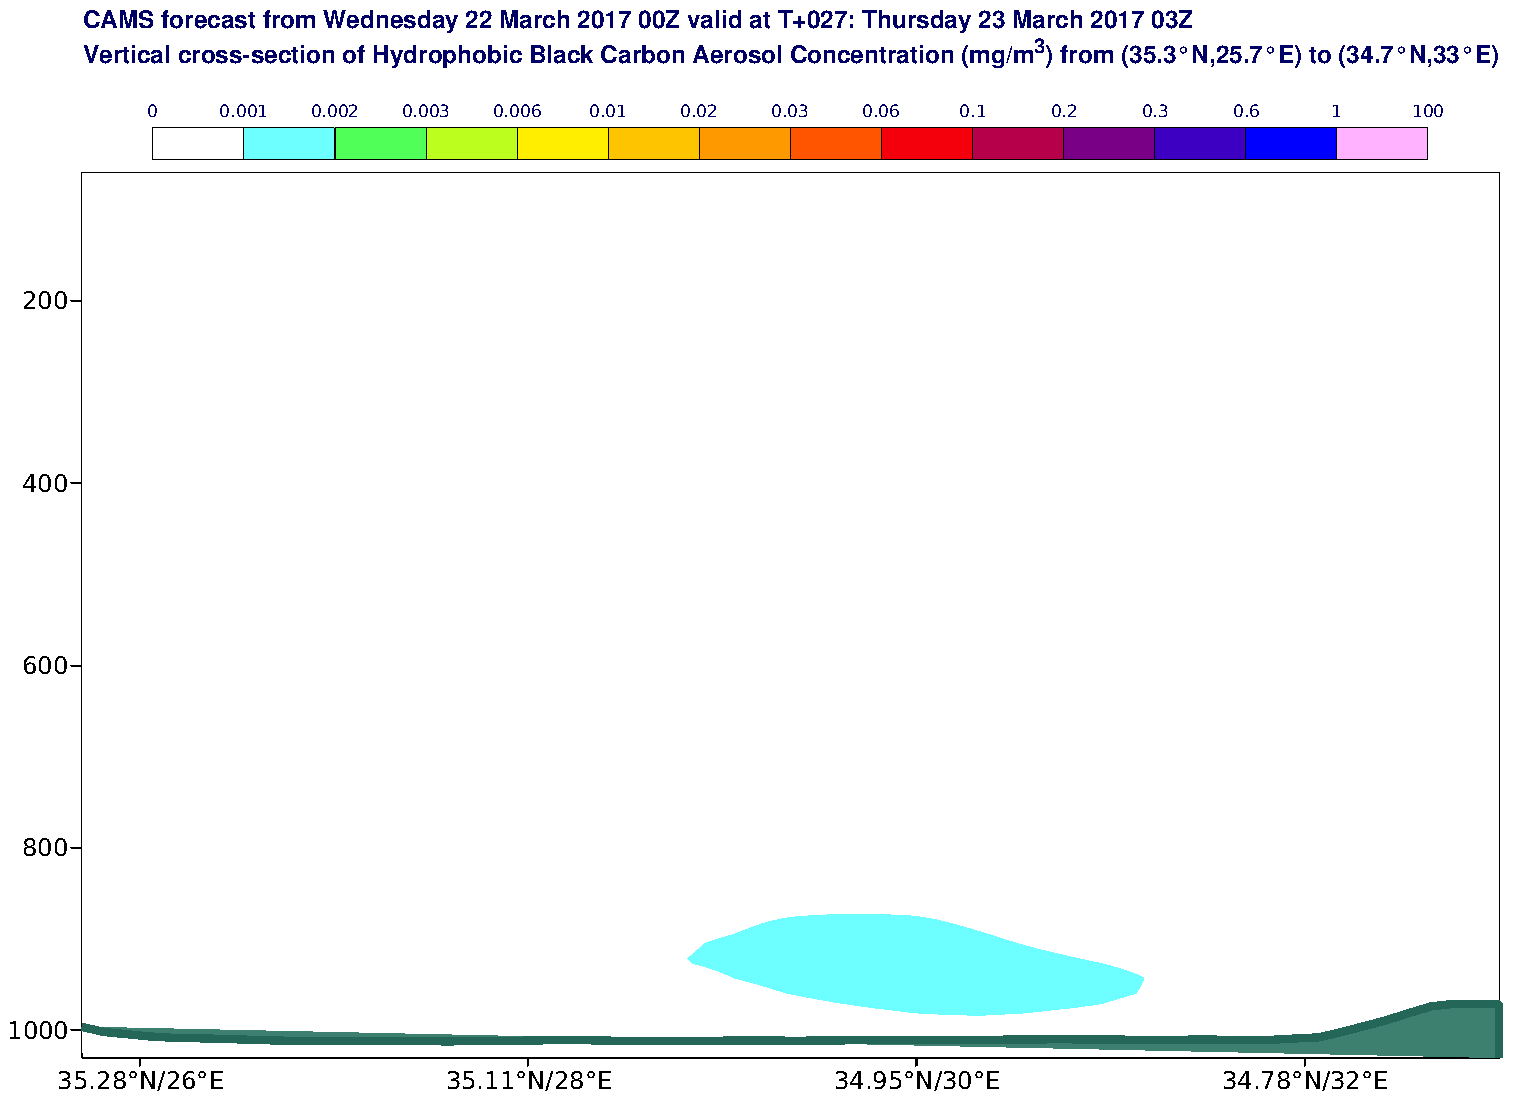 Vertical cross-section of Hydrophobic Black Carbon Aerosol Concentration (mg/m3) valid at T27 - 2017-03-23 03:00